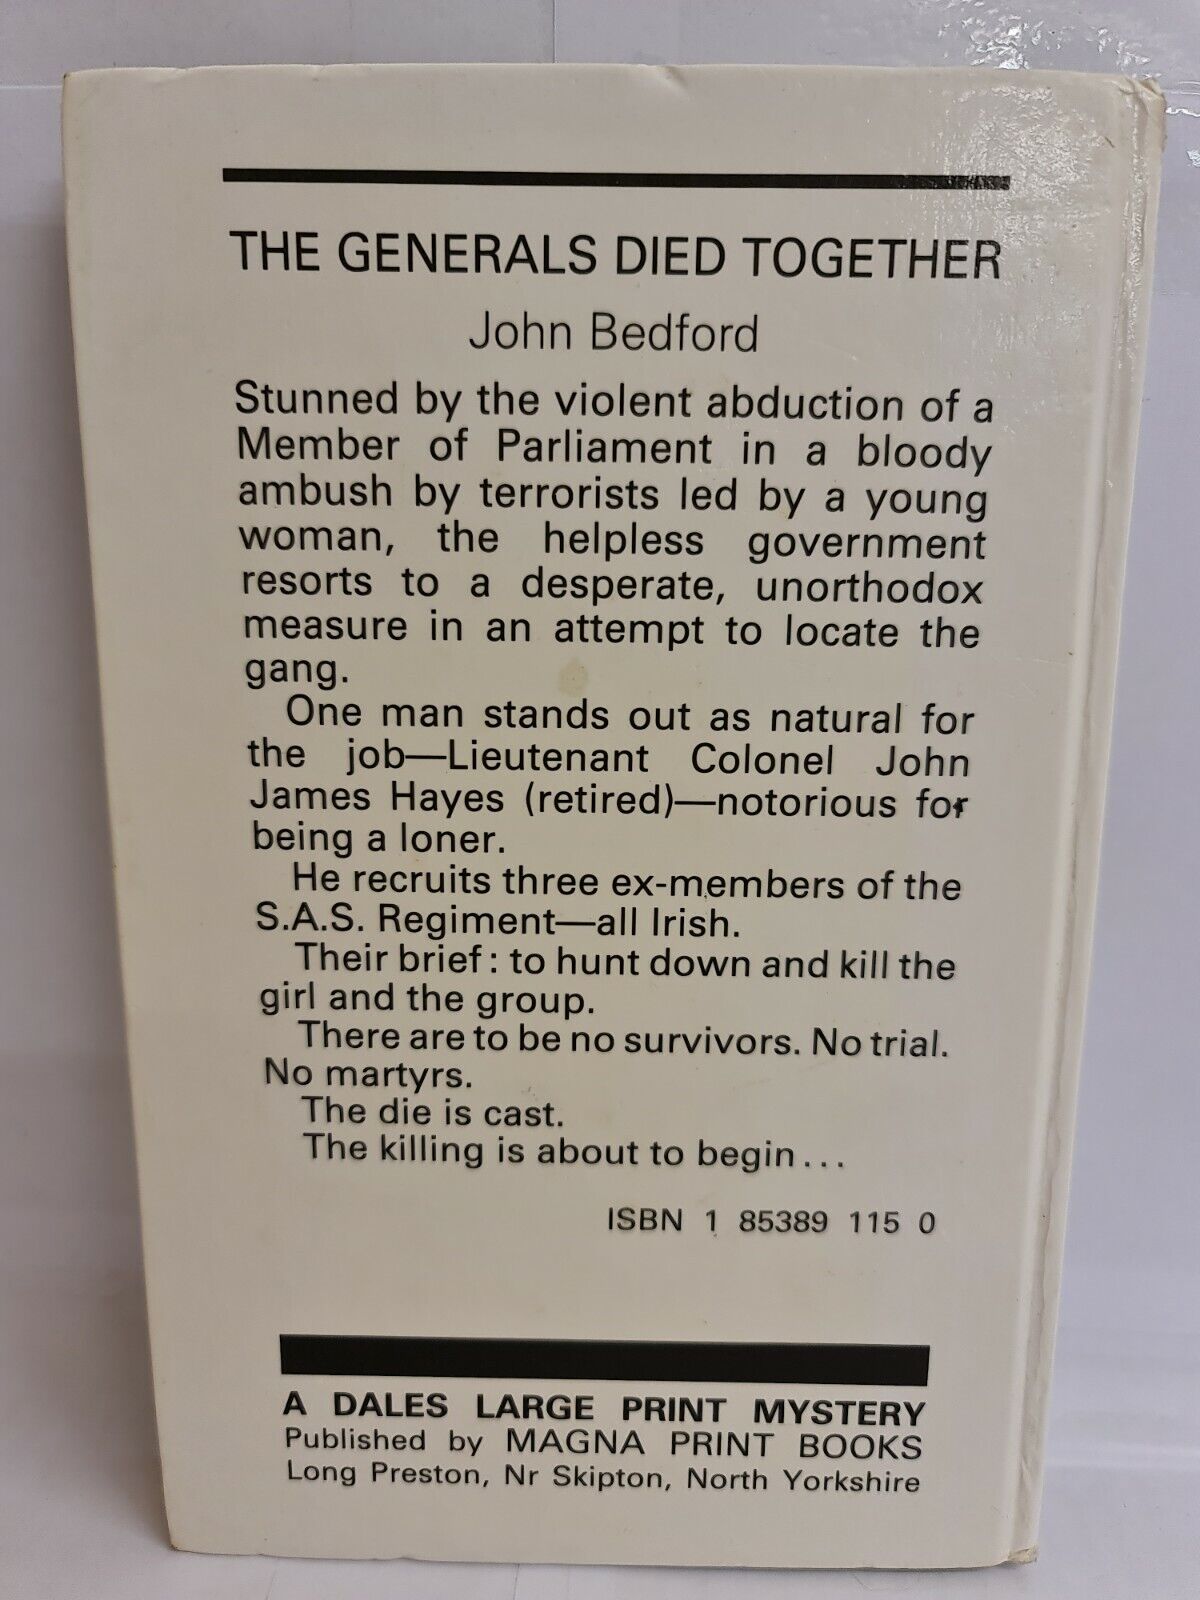 The Generals Died Together by John Bedford (1990) LARGE PRINT